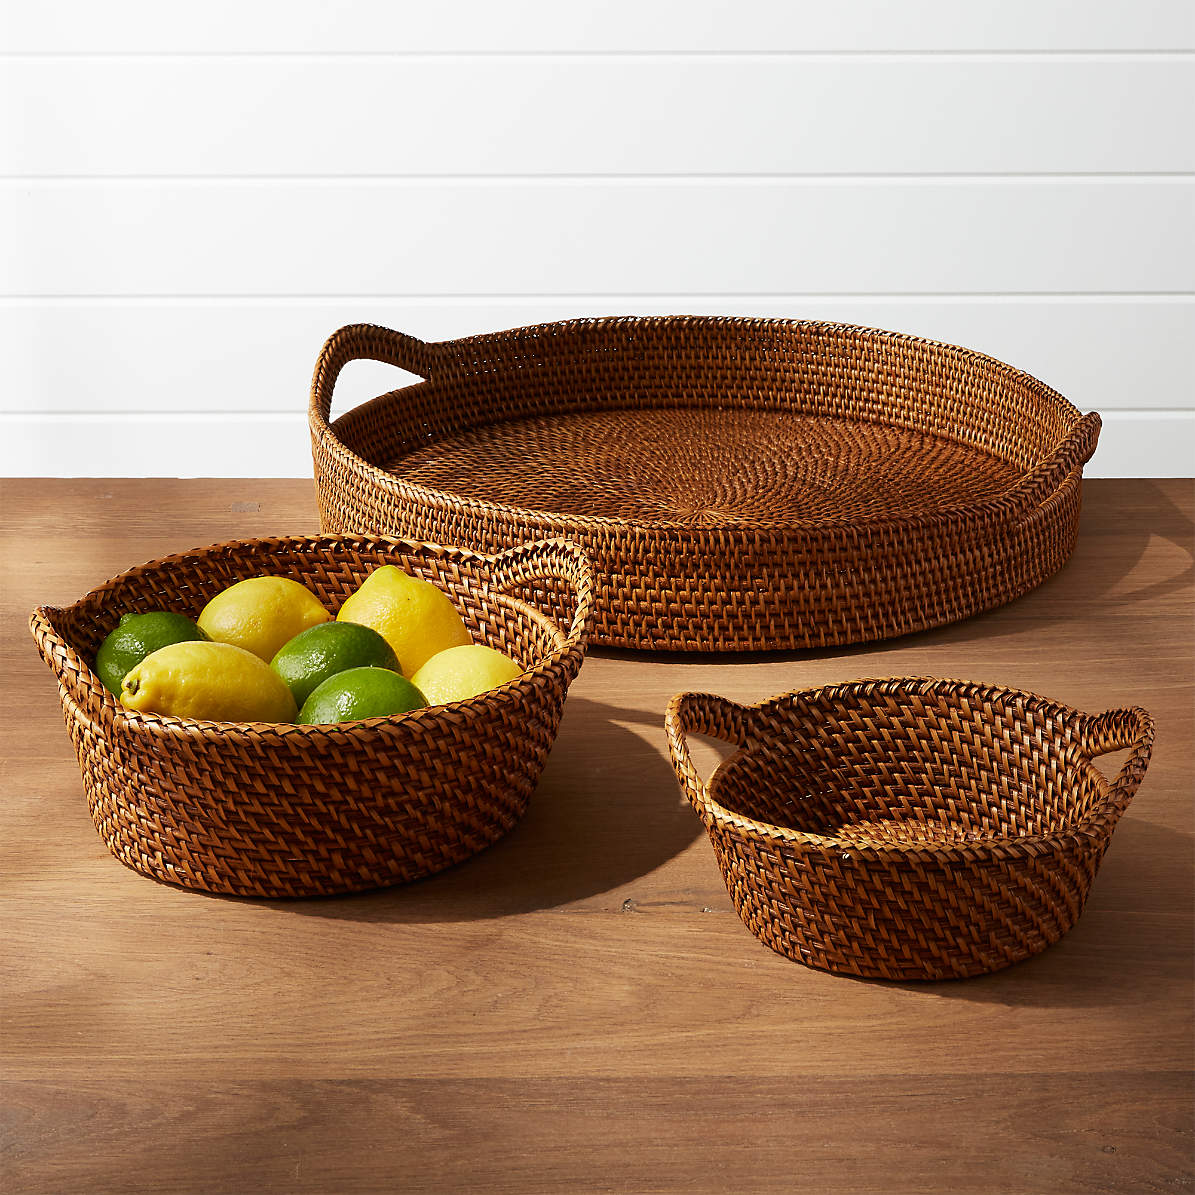 Artesia Natural Round Rattan Tray with Handles + Reviews